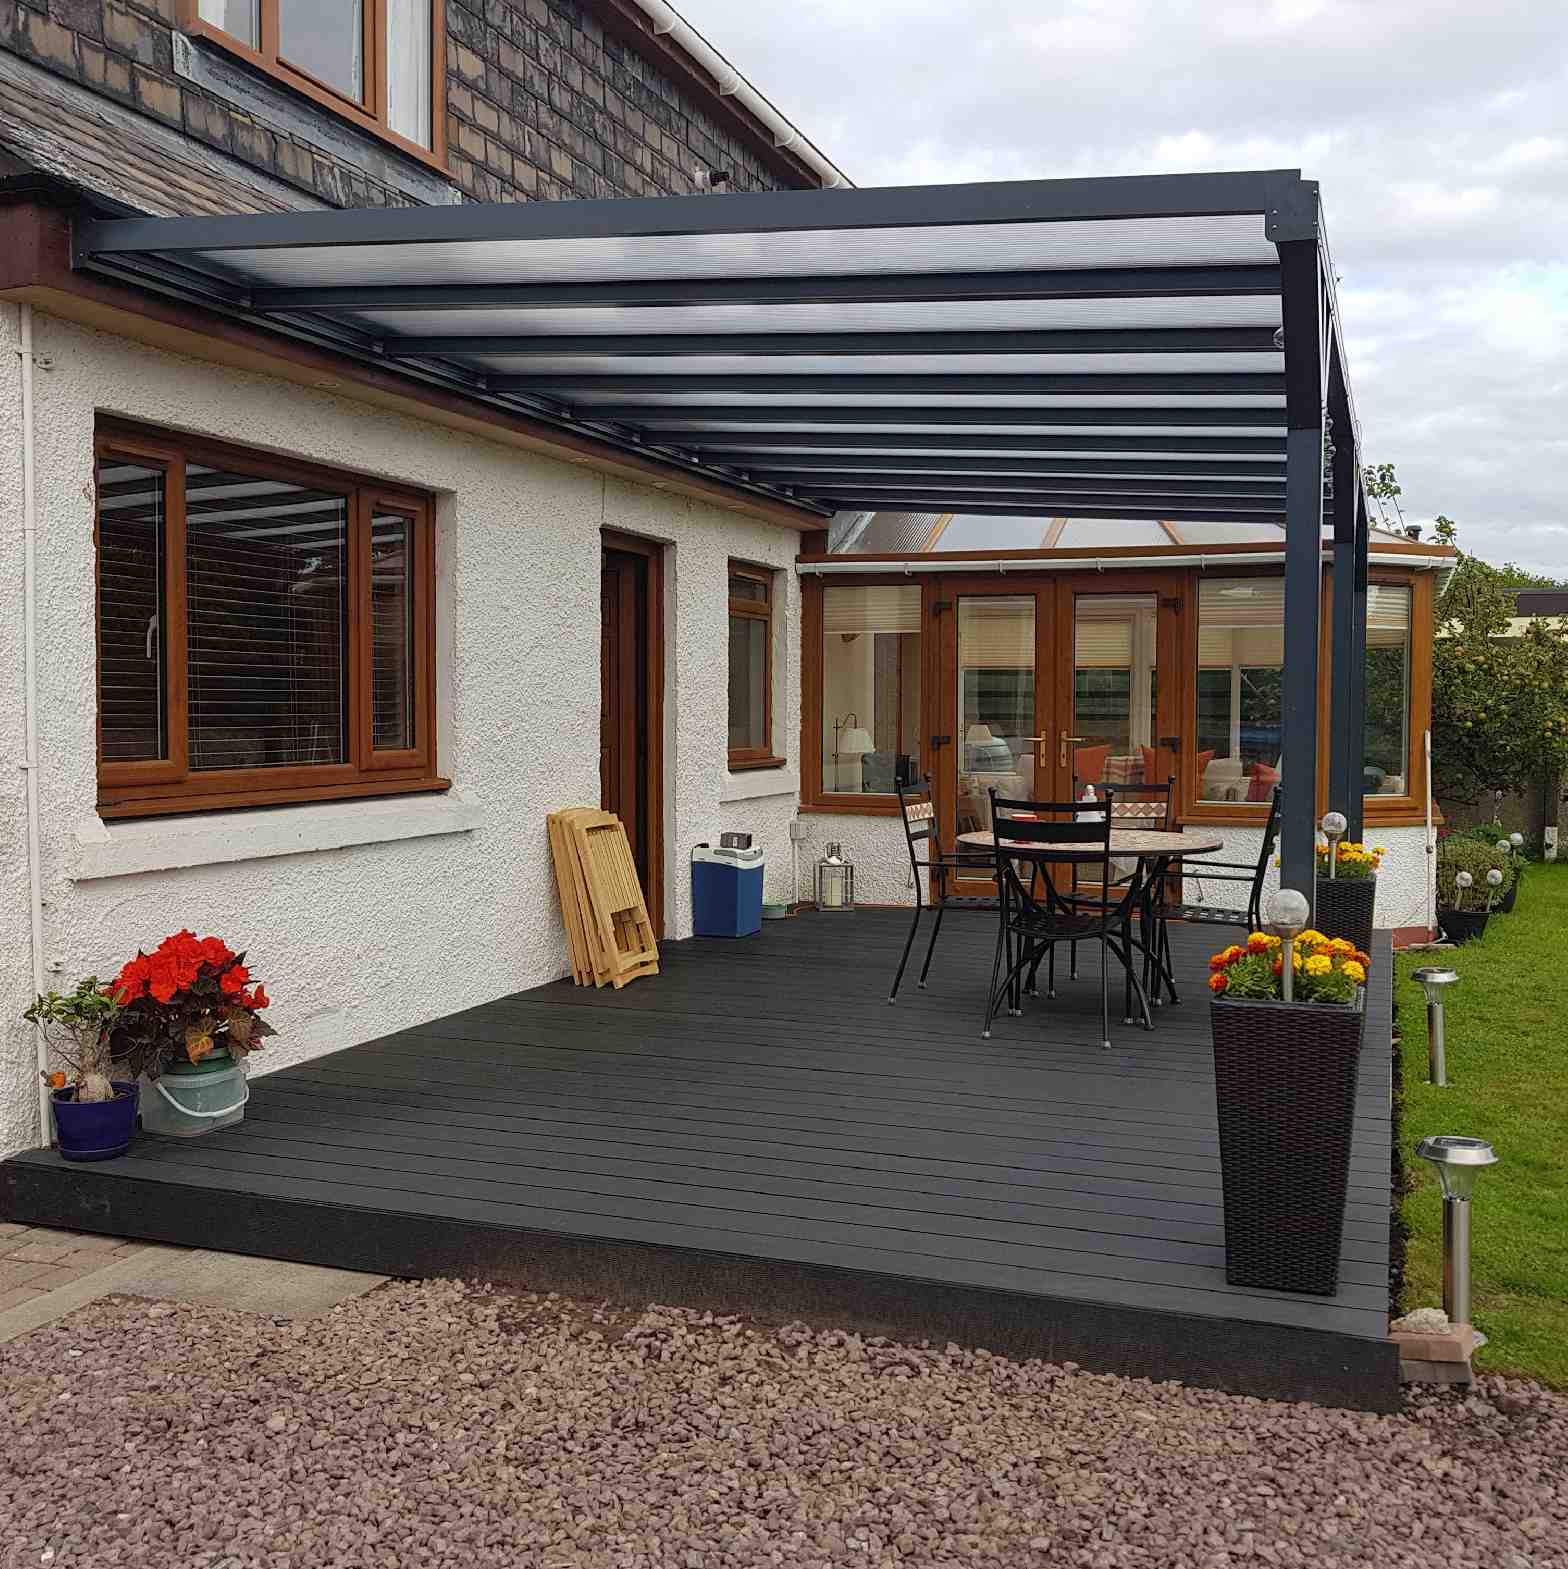 Buy Omega Verandah, Anthracite Grey, 16mm Polycarbonate Glazing - 3.5m (W) x 4.5m (P), (3) Supporting Posts online today